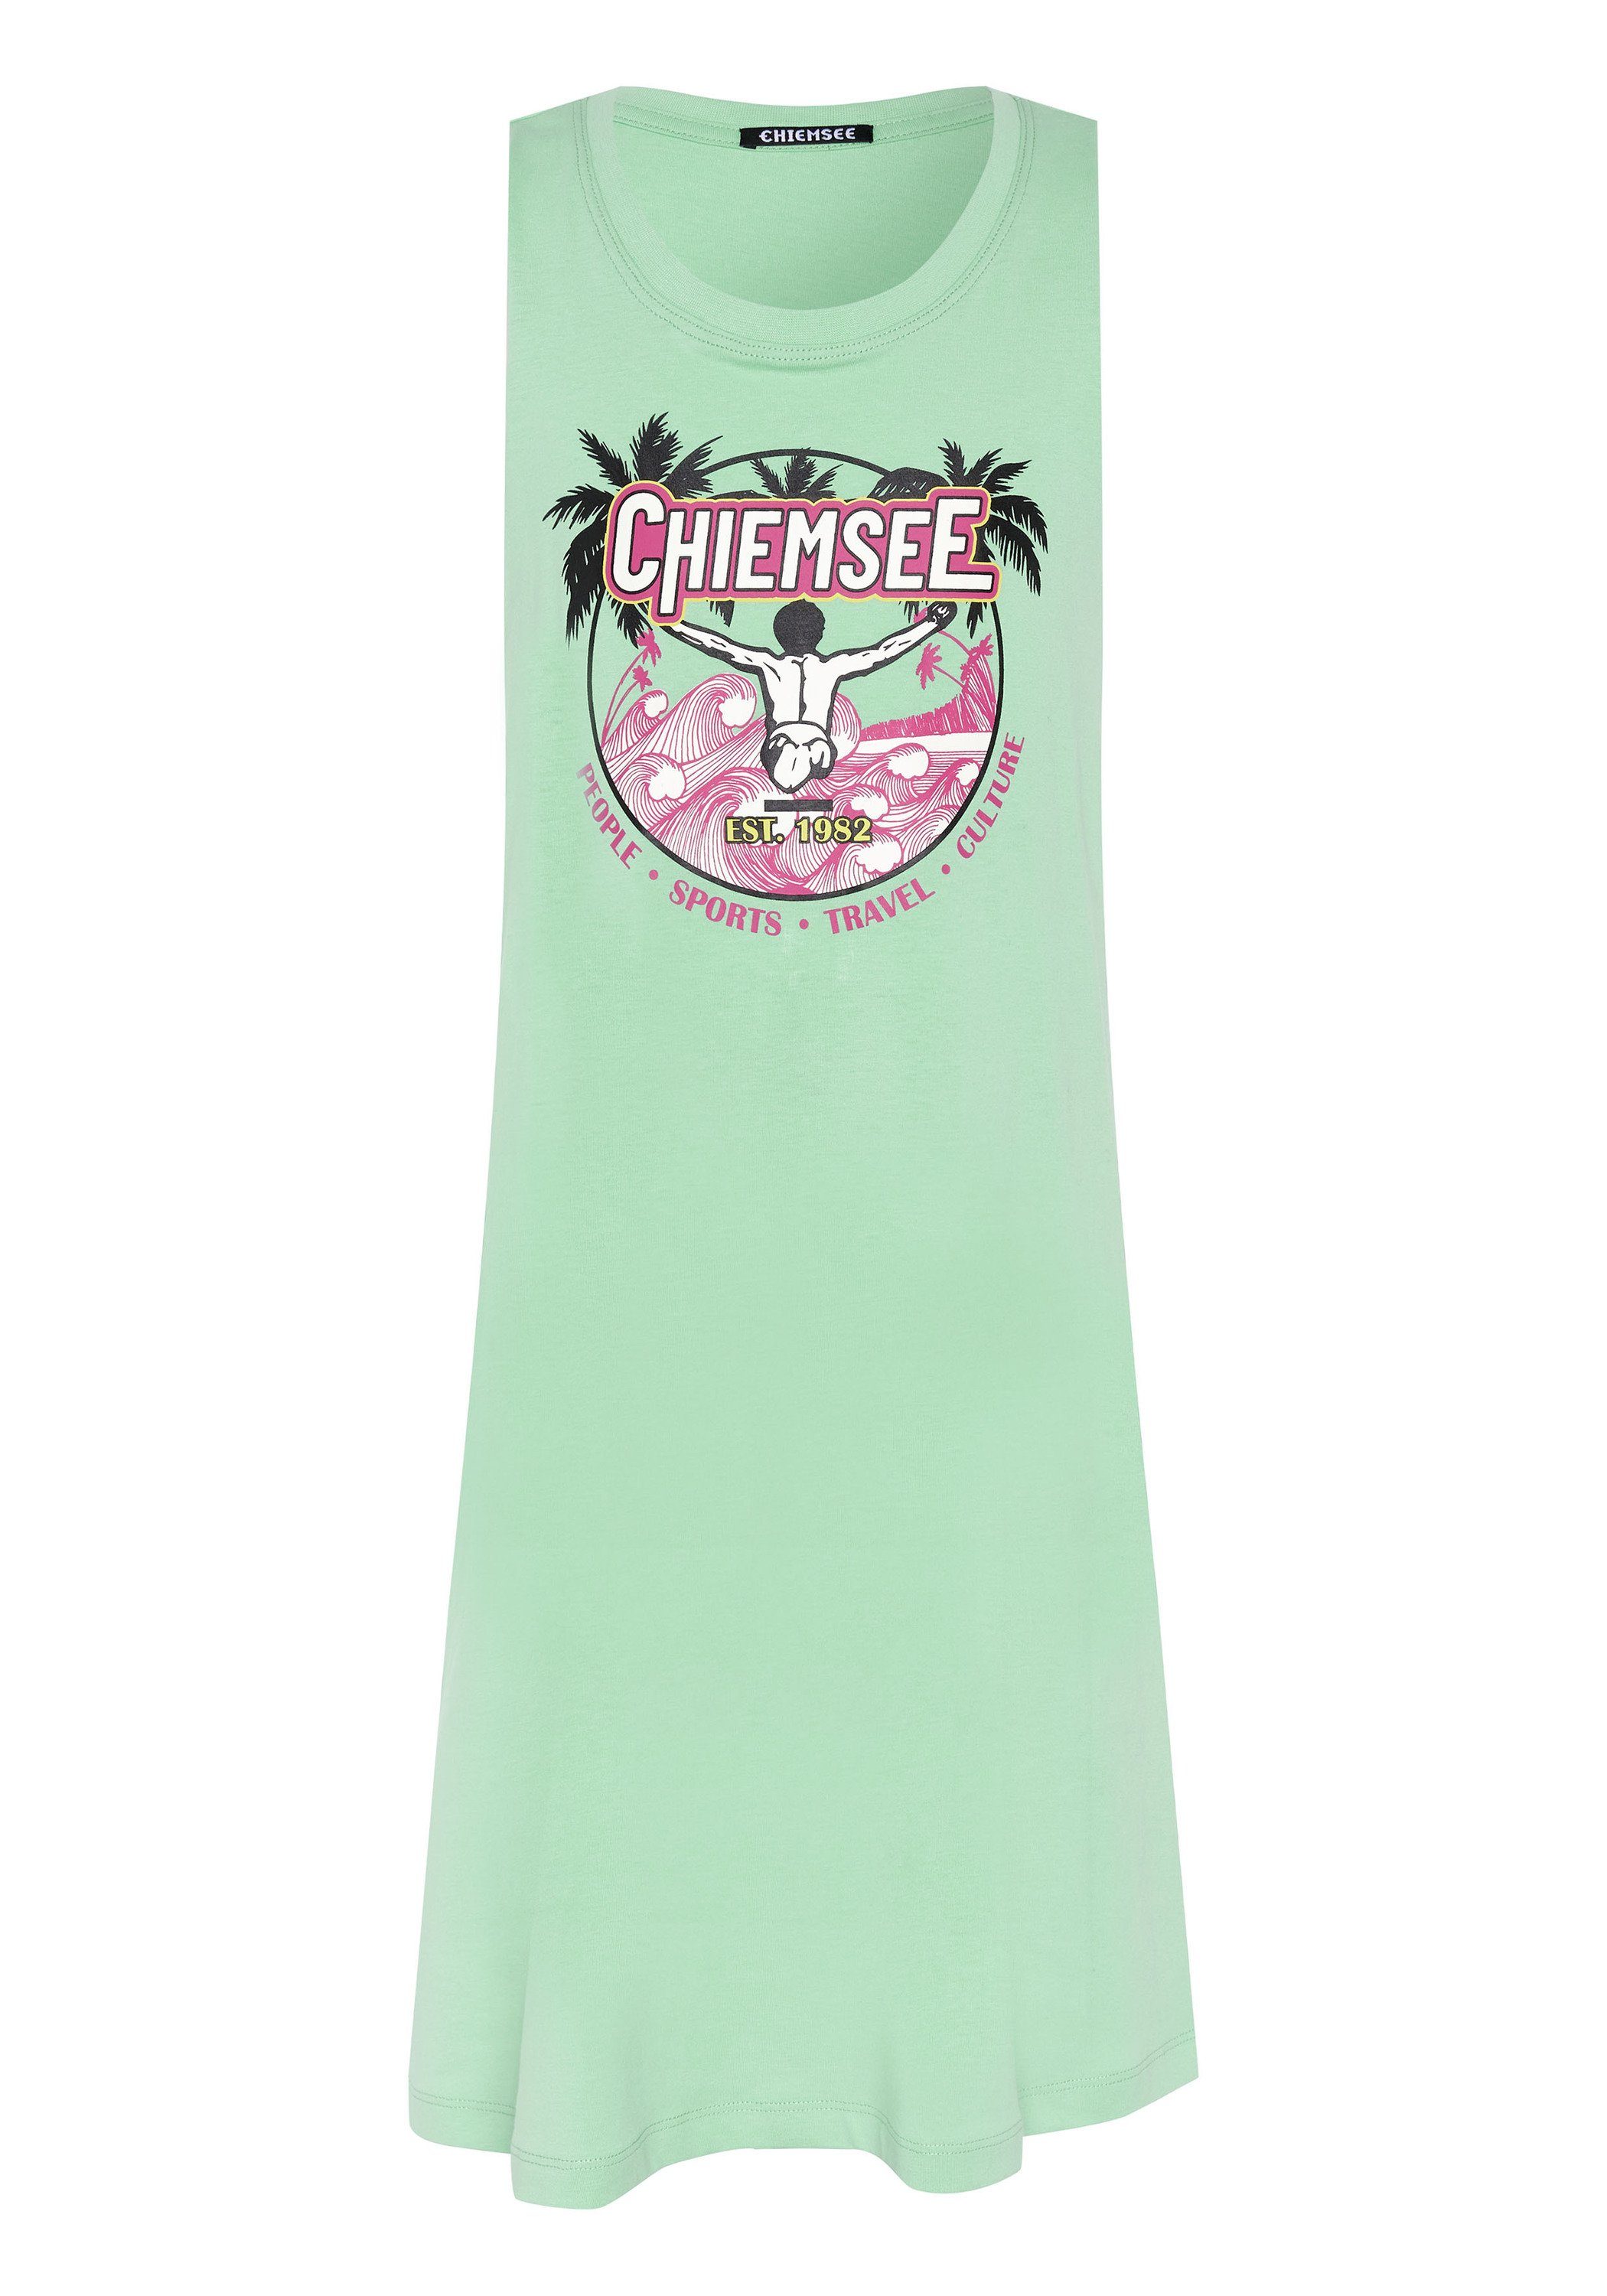 Cut-Out Green Tanktop Chiemsee mit Labelprint Longtop Neptune und 1